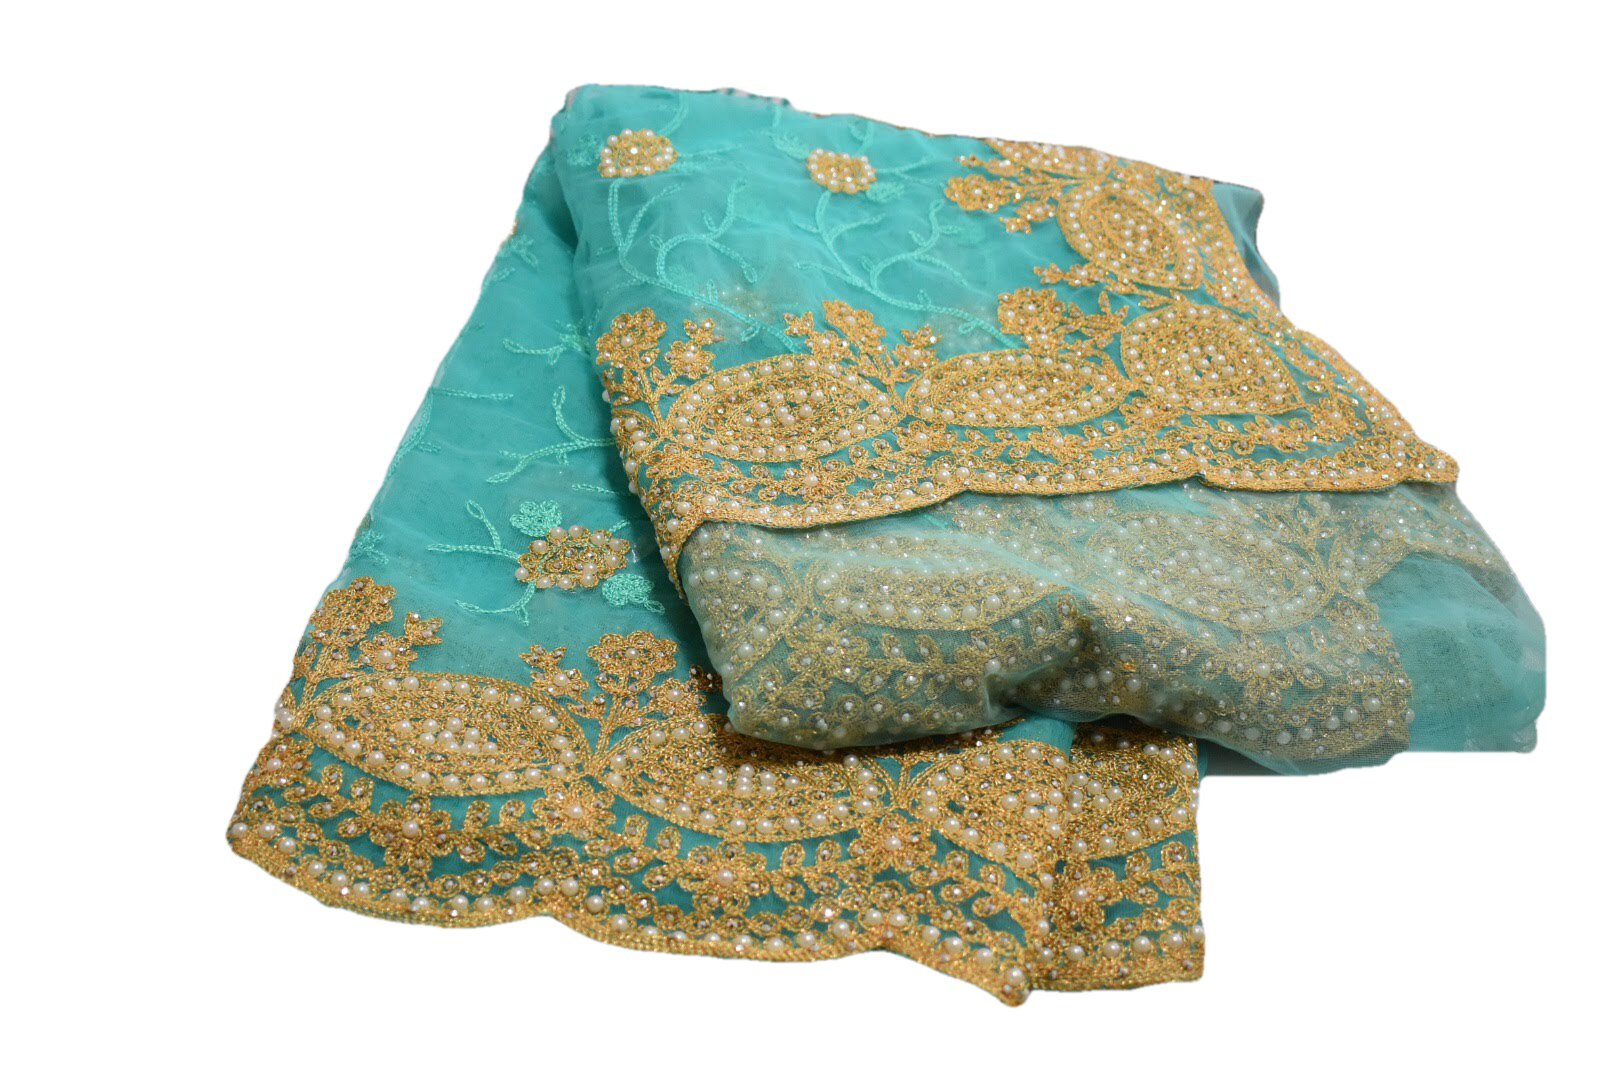 Wedding wear Saree Blue Color - Pure Chiffon Net Saree- Resham Thread Embroidery - Faux Pearl And Stone Work